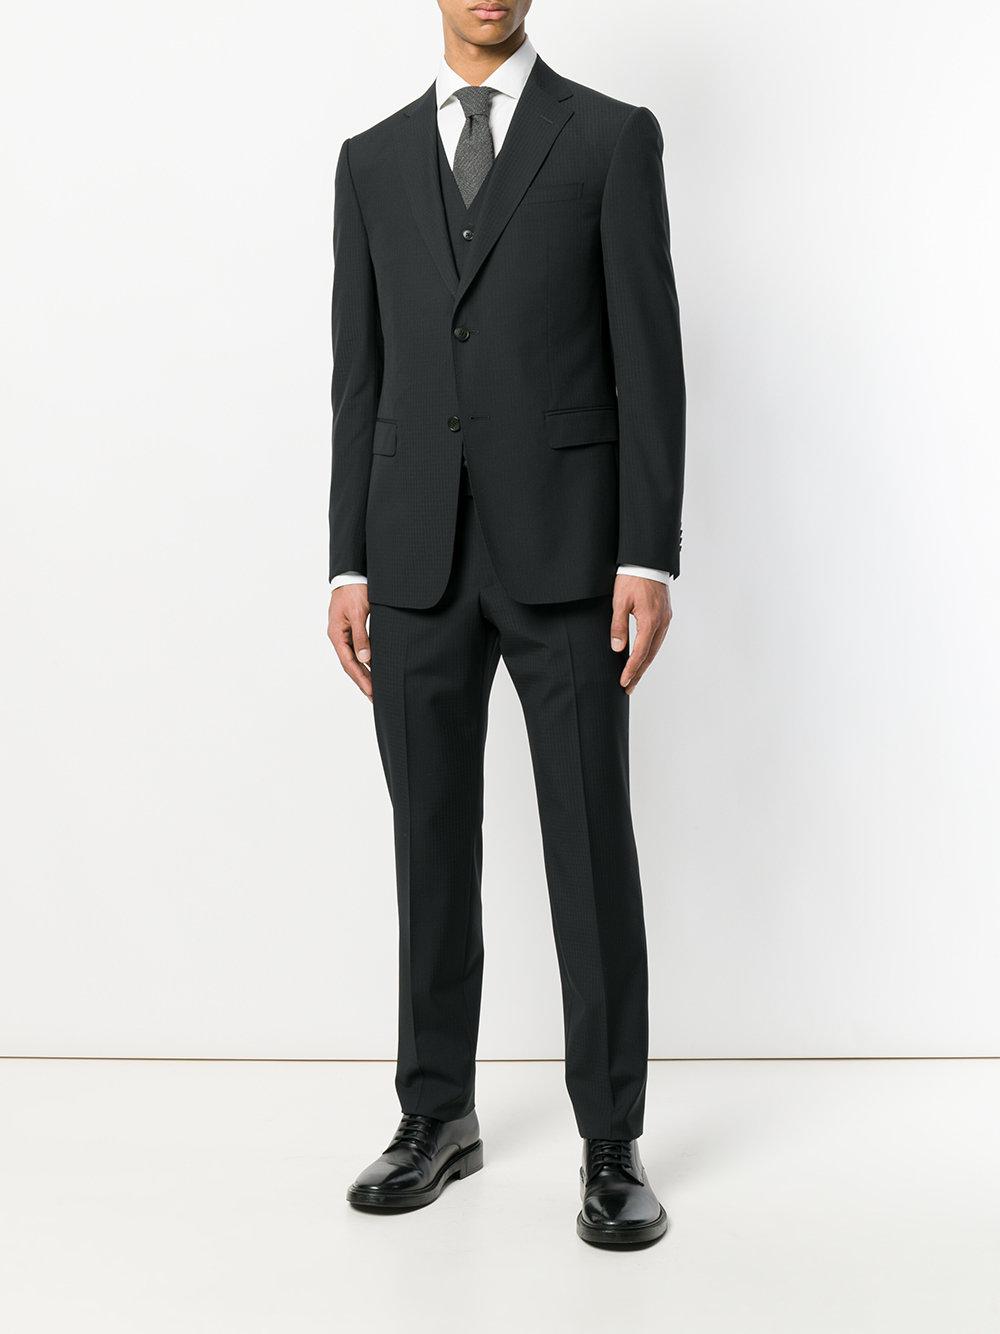 Z Zegna Wool Three Piece Formal Suit in Black for Men - Lyst